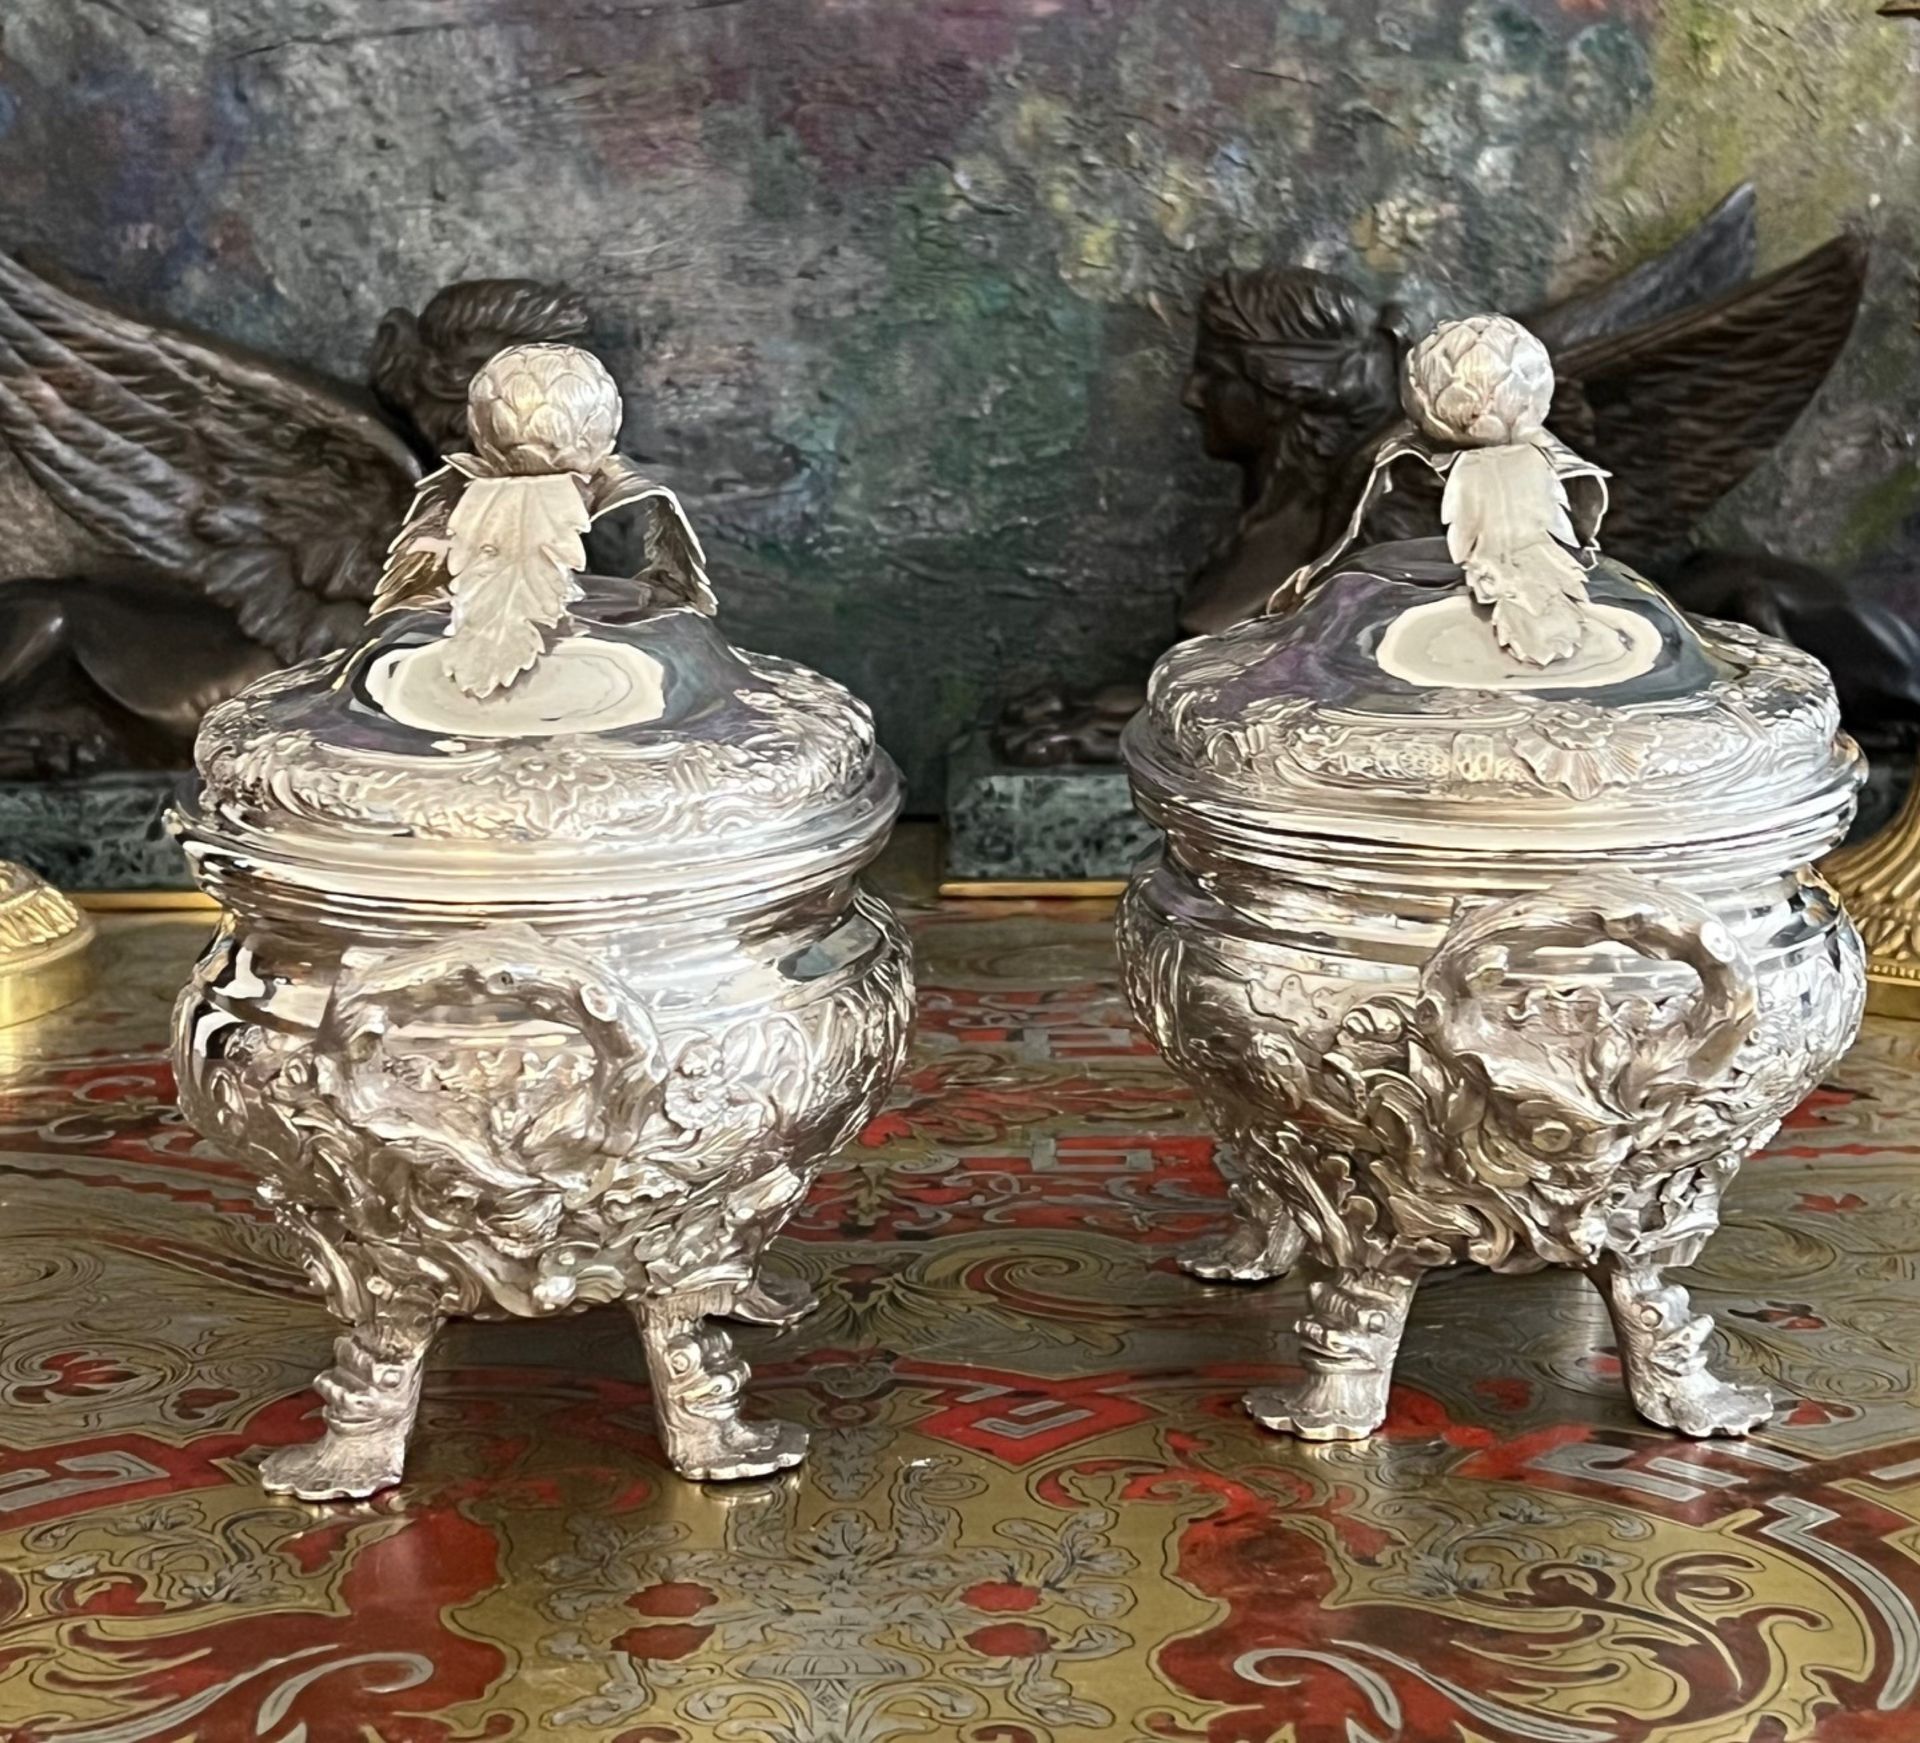 A FINE PAIR OF 18TH CENTURY STERLING SILVER SAUCE TUREENS, LONDON, 1790, WILLIAM PITTS - Image 3 of 19